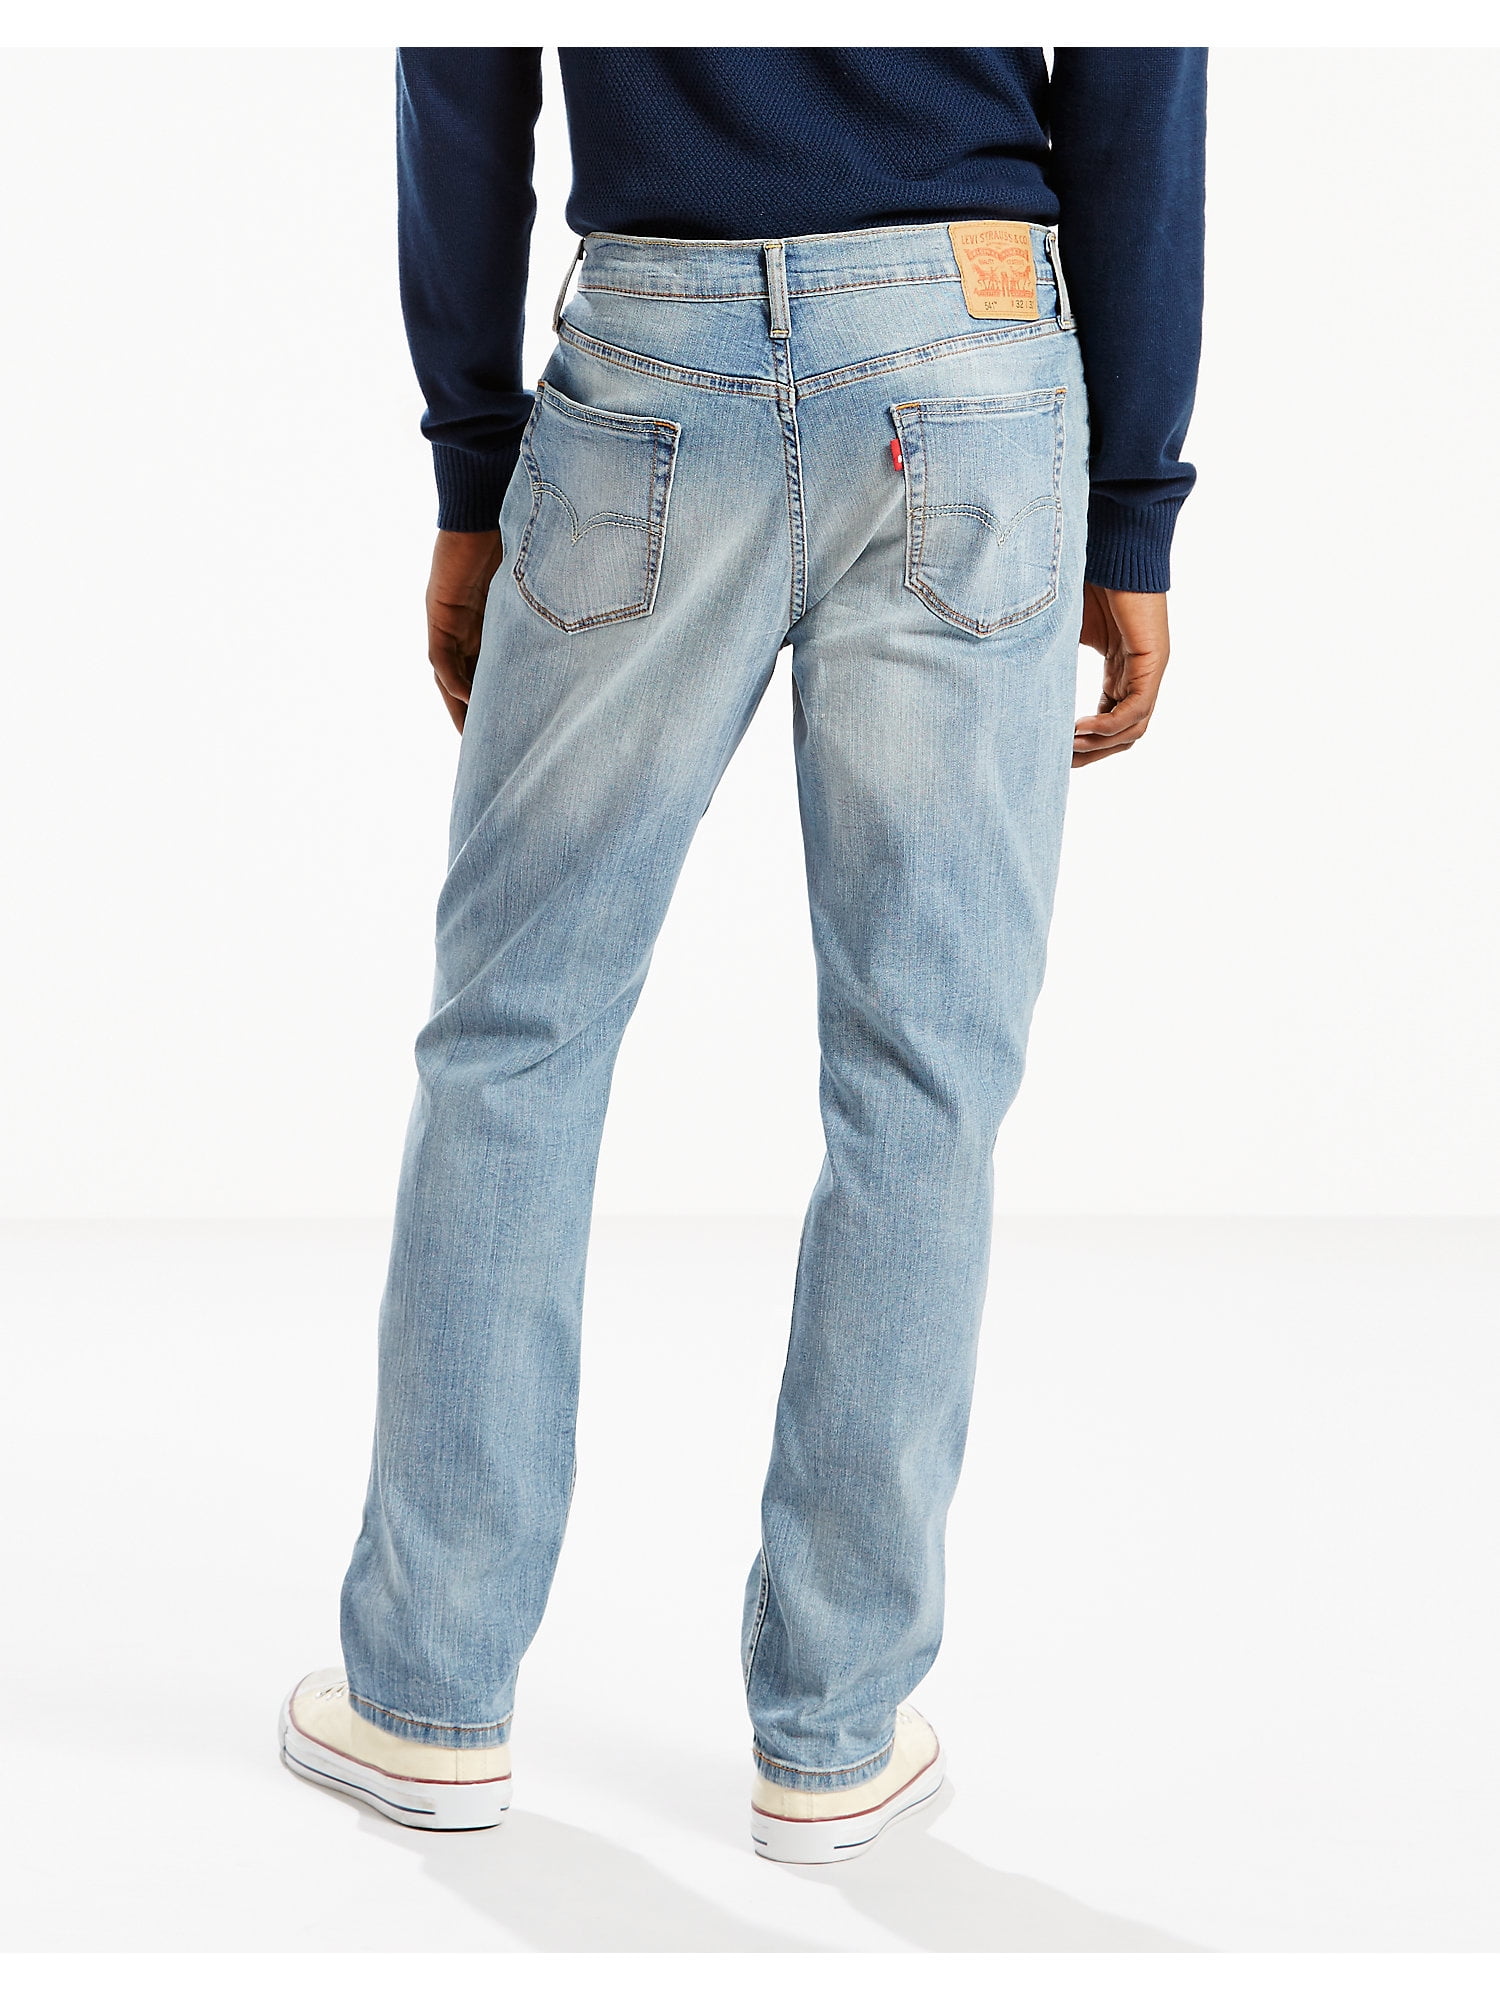 541 Athletic Fit Jeans 